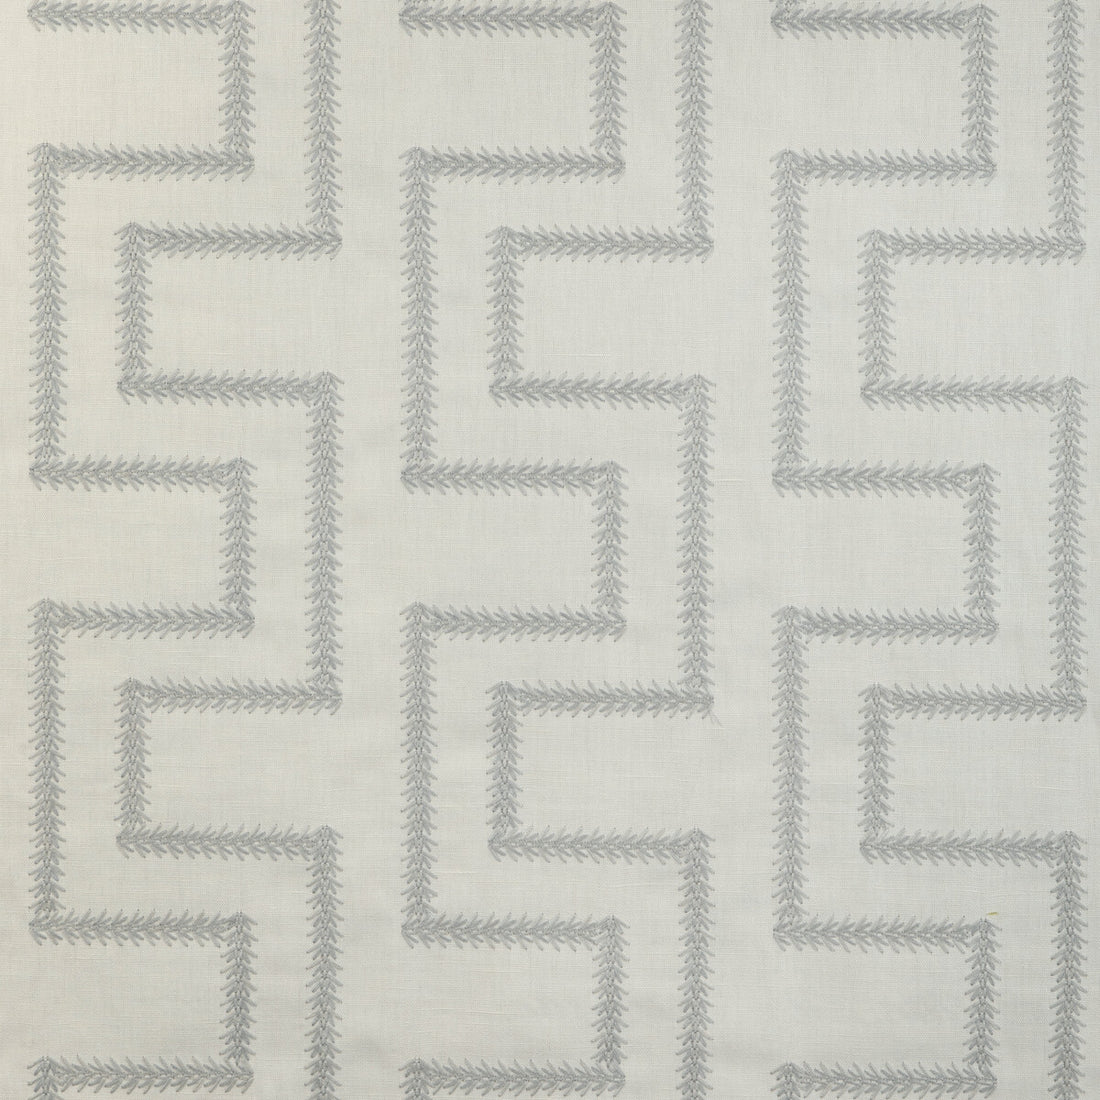 Roman Fret fabric in grey color - pattern 36844.11.0 - by Kravet Design in the Alexa Hampton collection